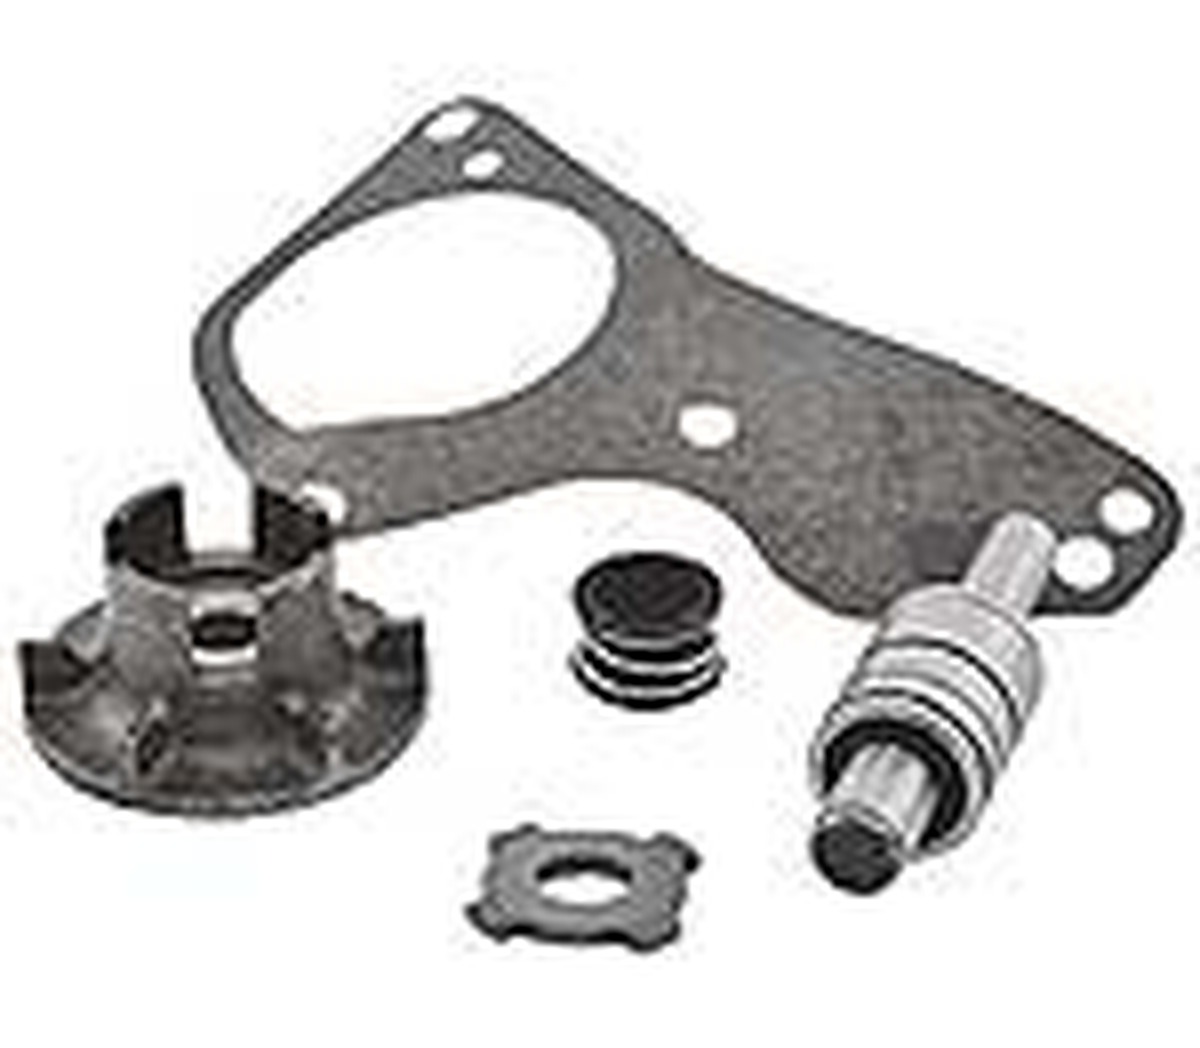 Water Pump & related parts - Water pump kit double pulley 1937-48